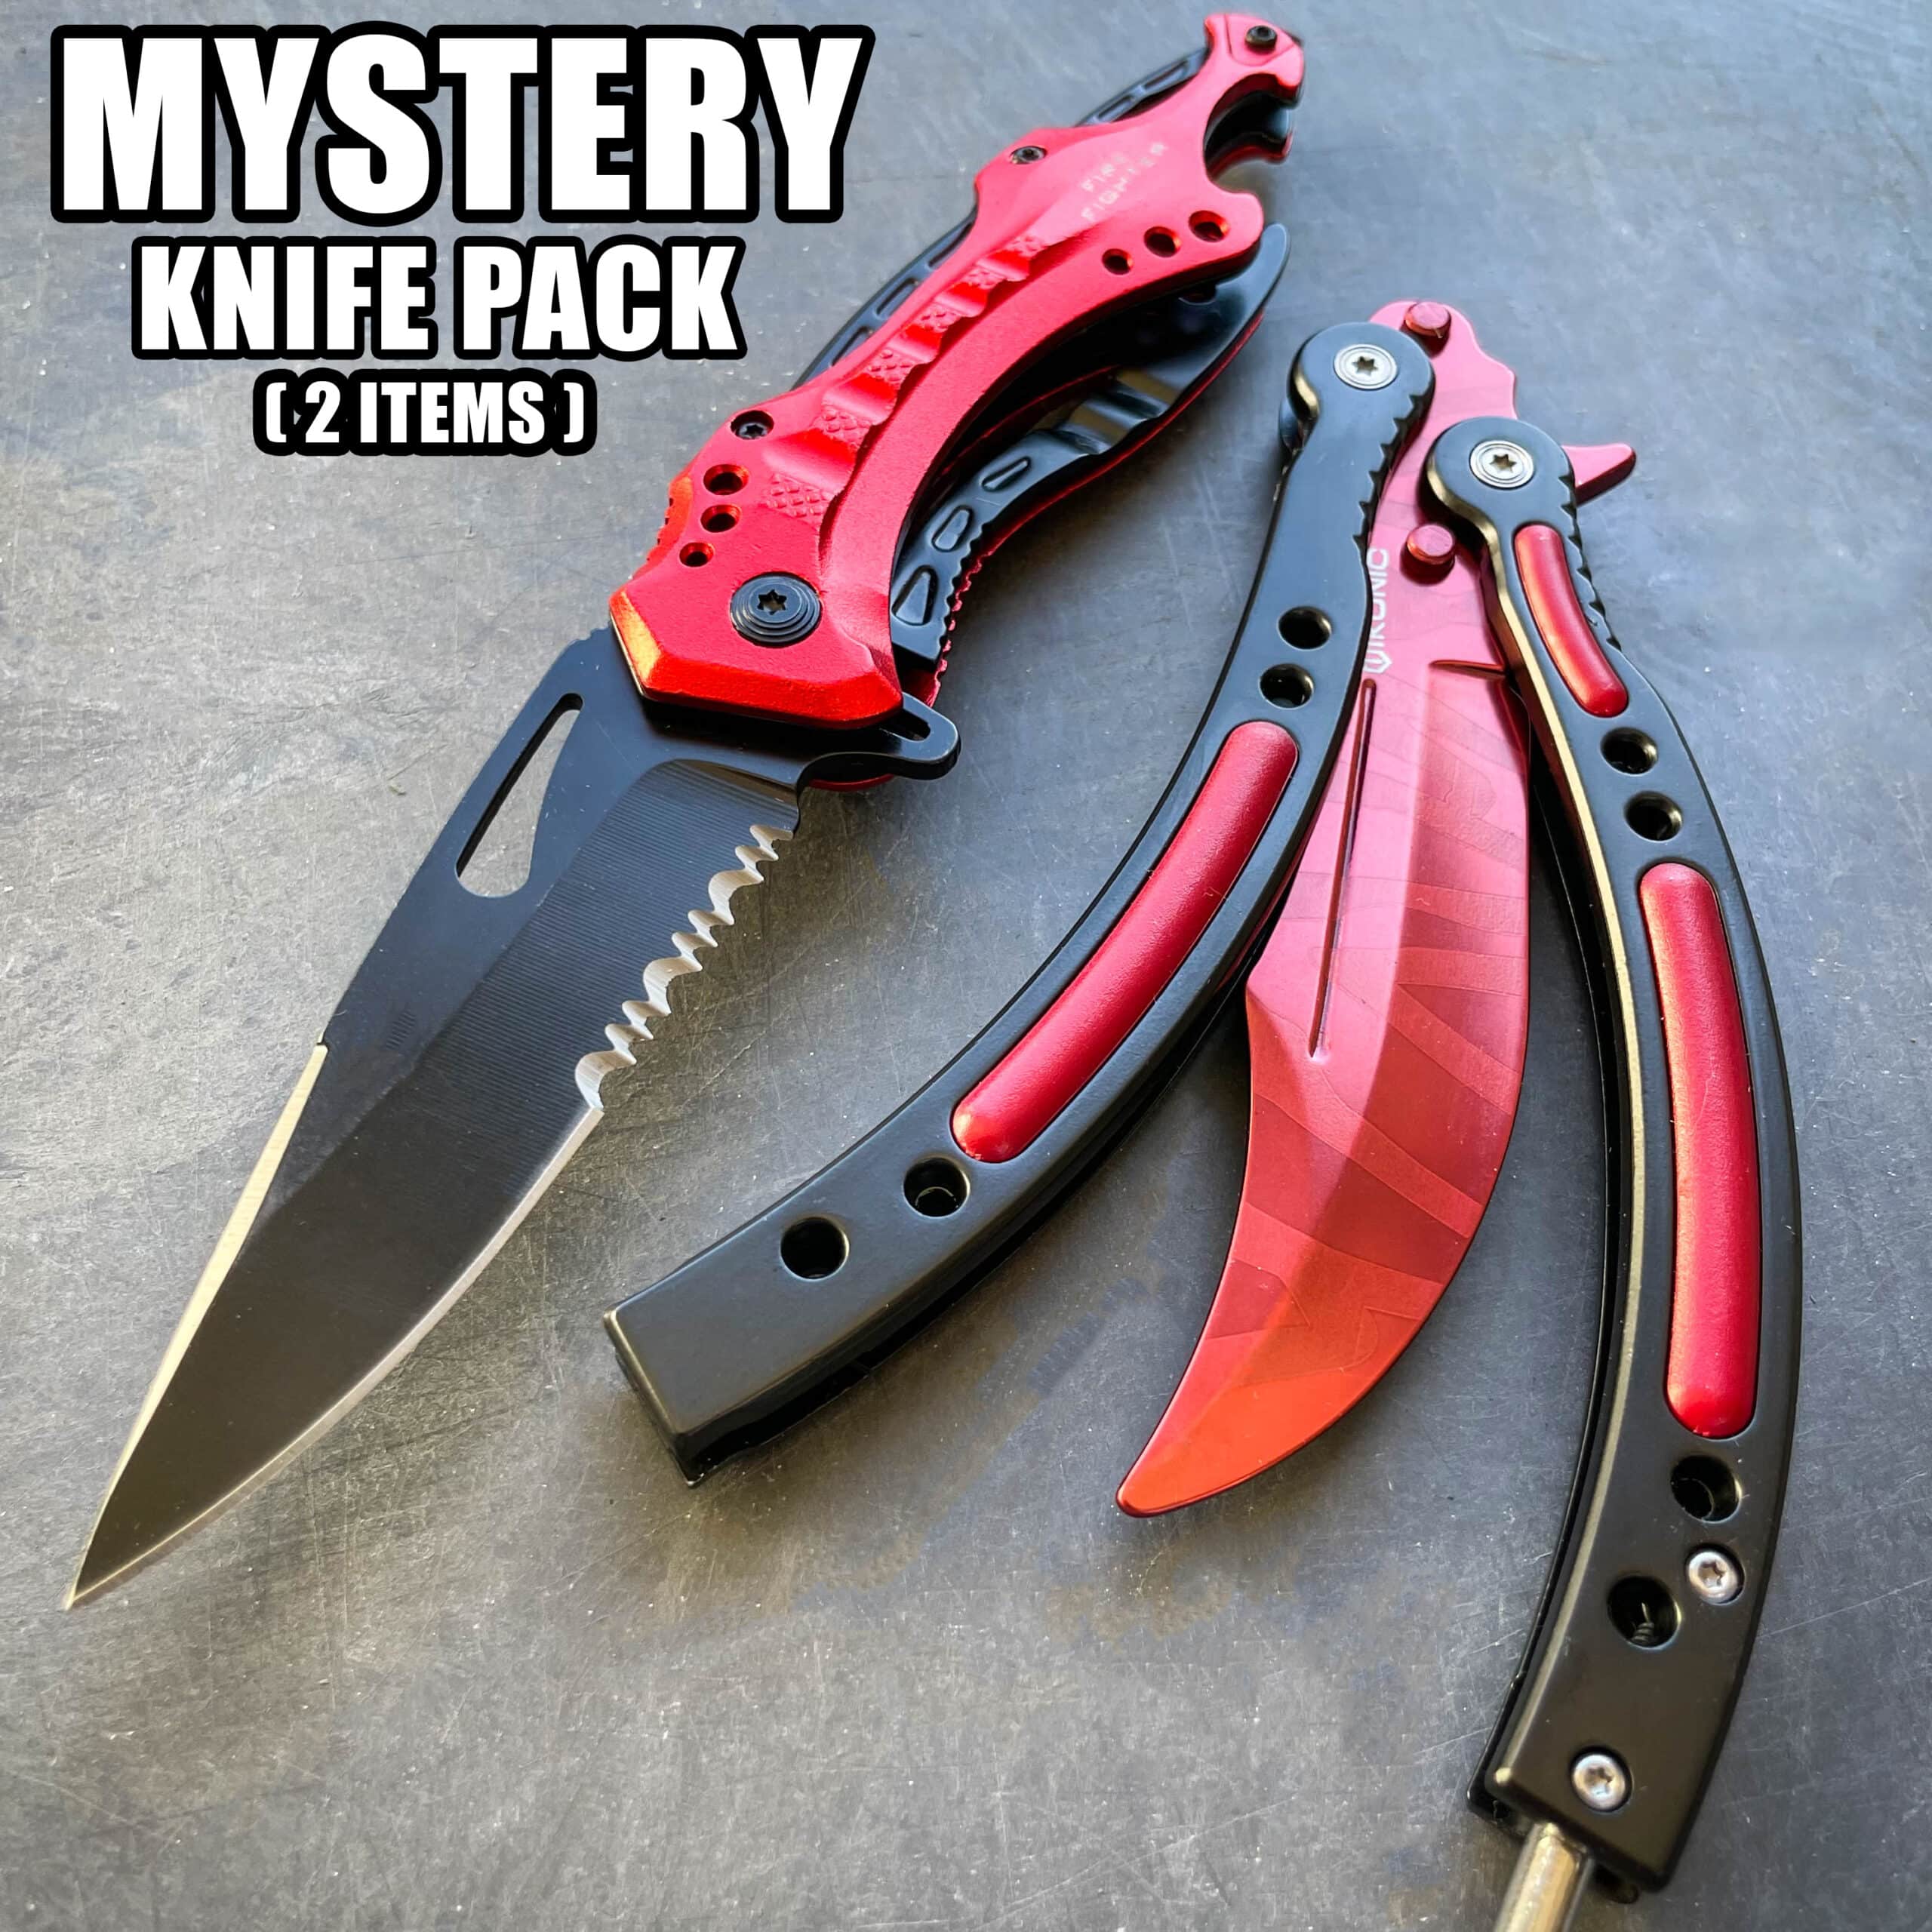 Monthly Mystery Knife Subscription: 2-Piece Surprise Knife Box